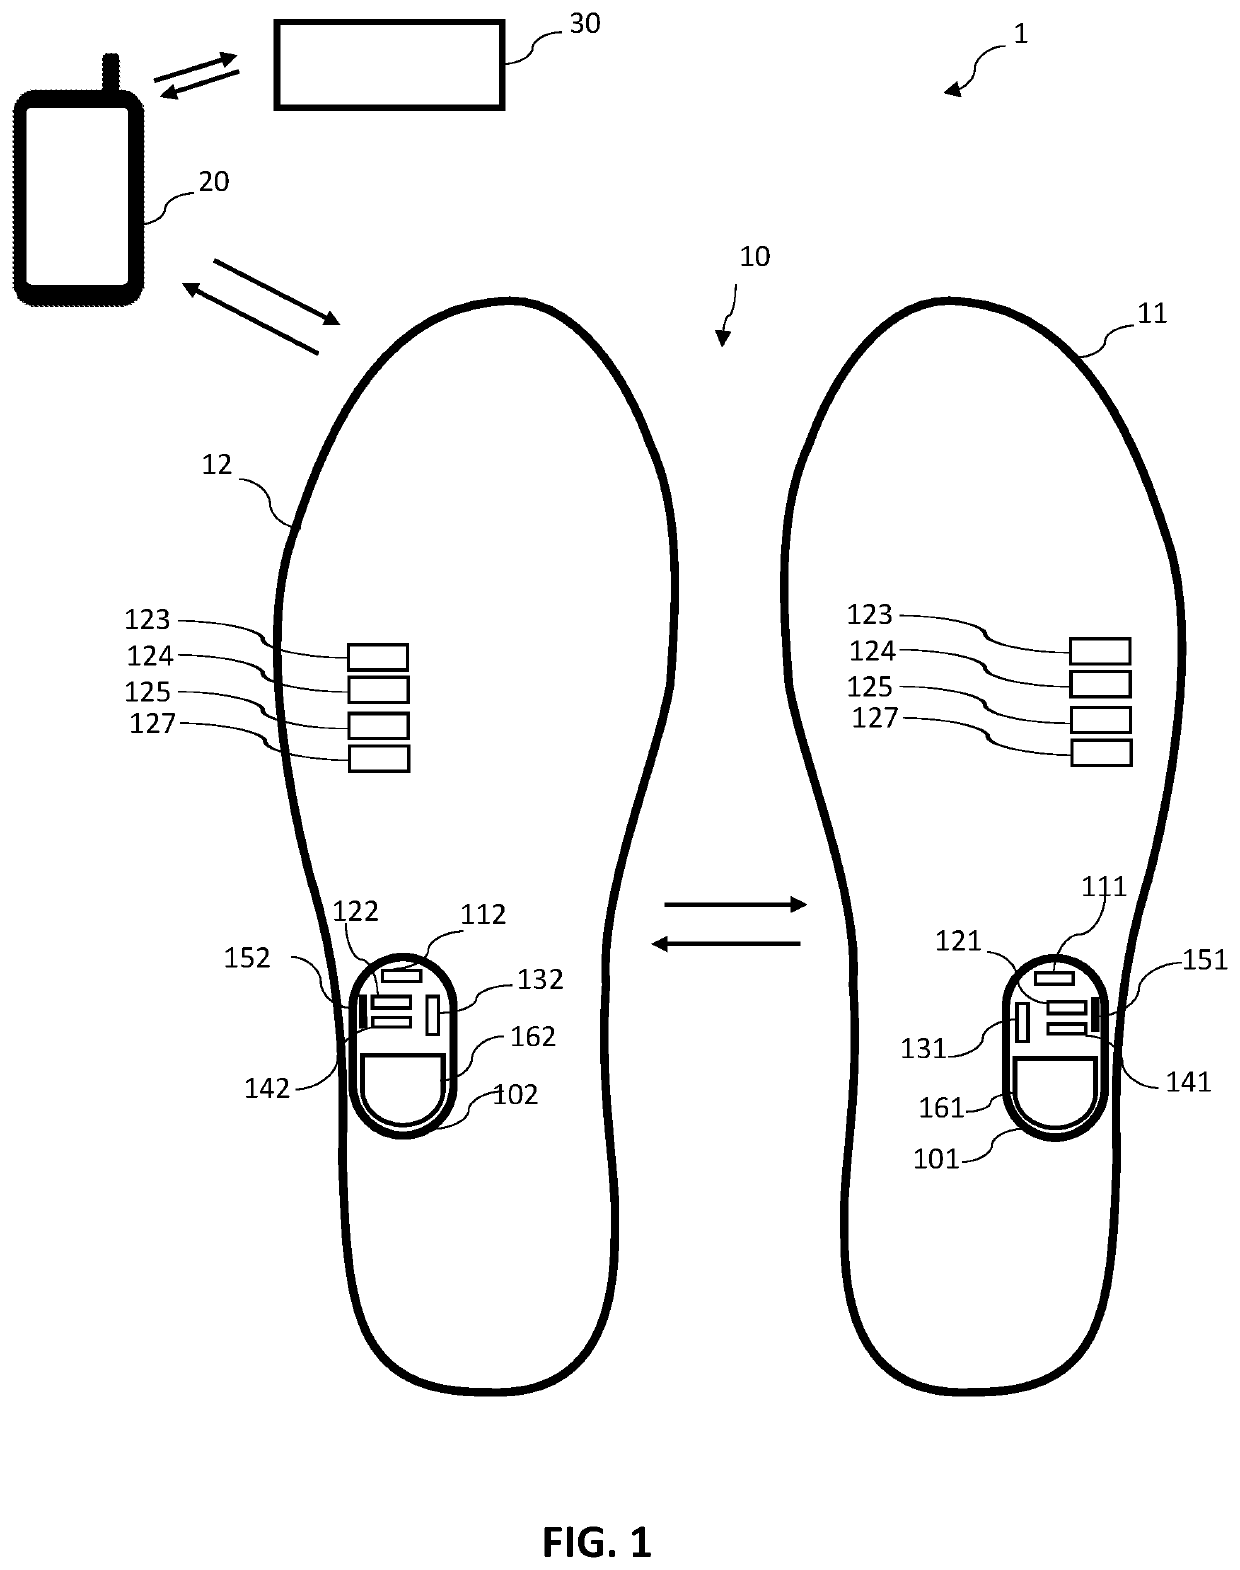 Miniaturized electronic unit for integration in any sole